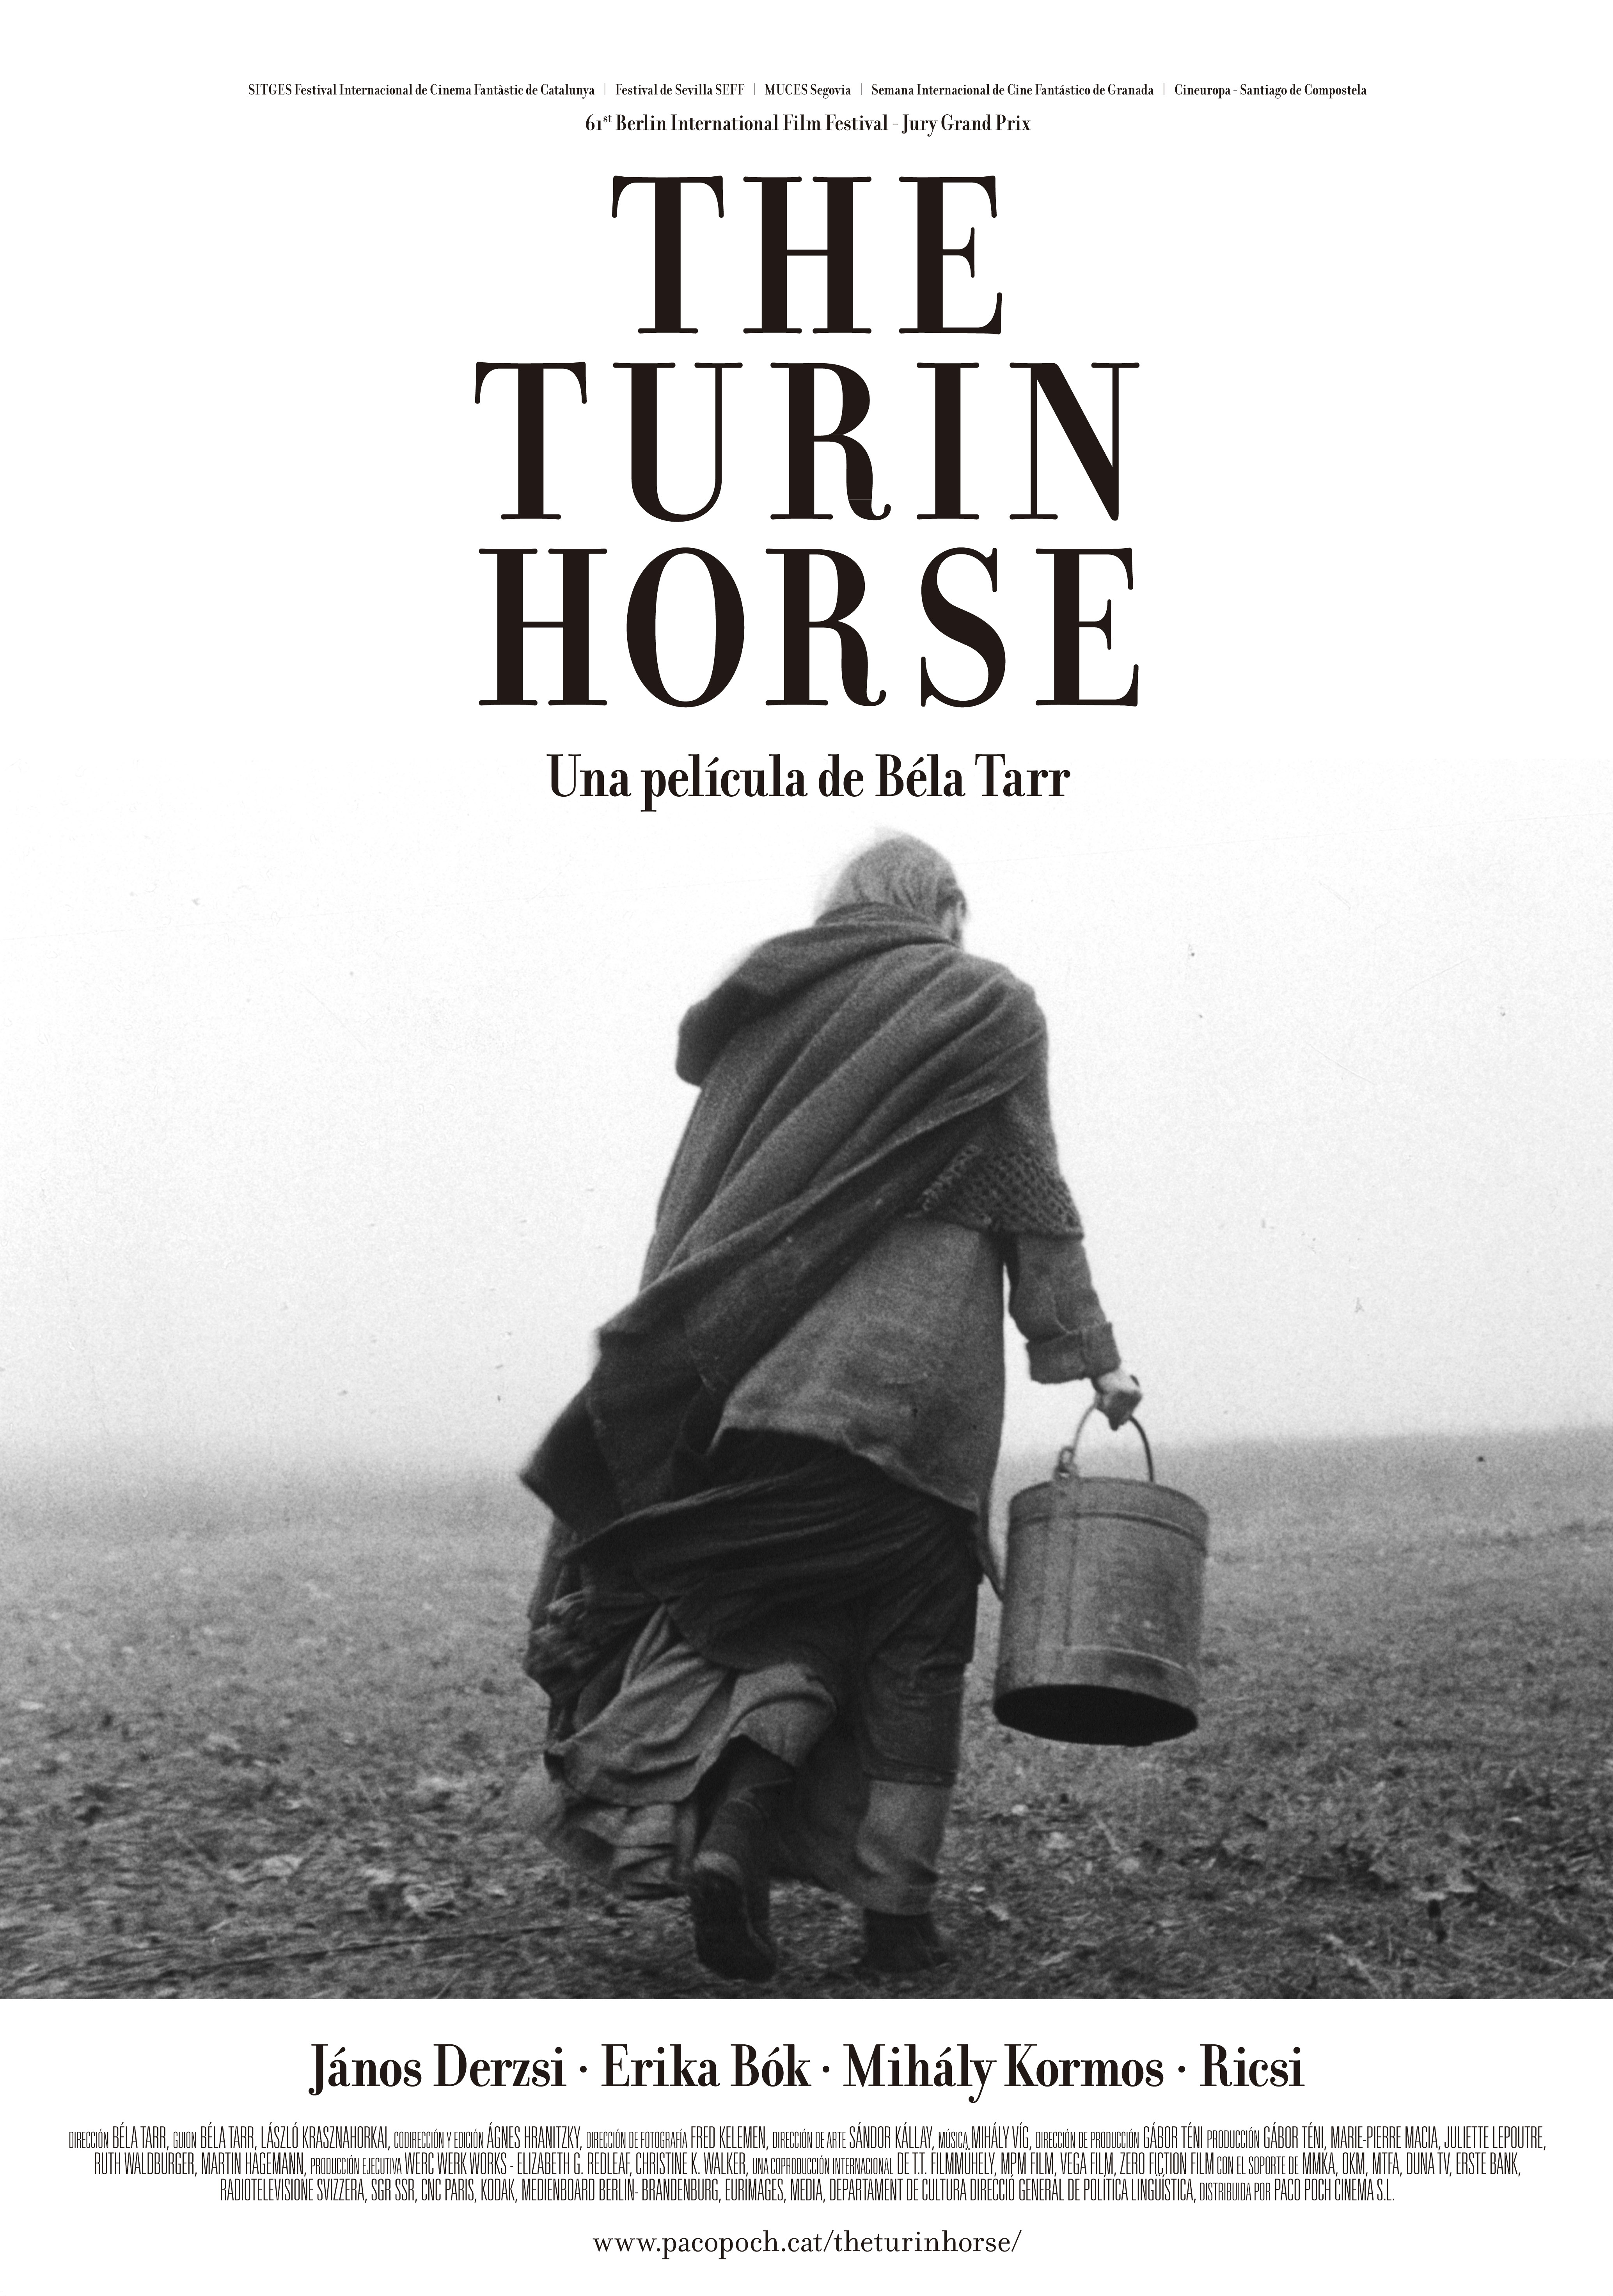 65- The Turin Horse (Bela Tarr and Ágnes Hranitzky, 2011)